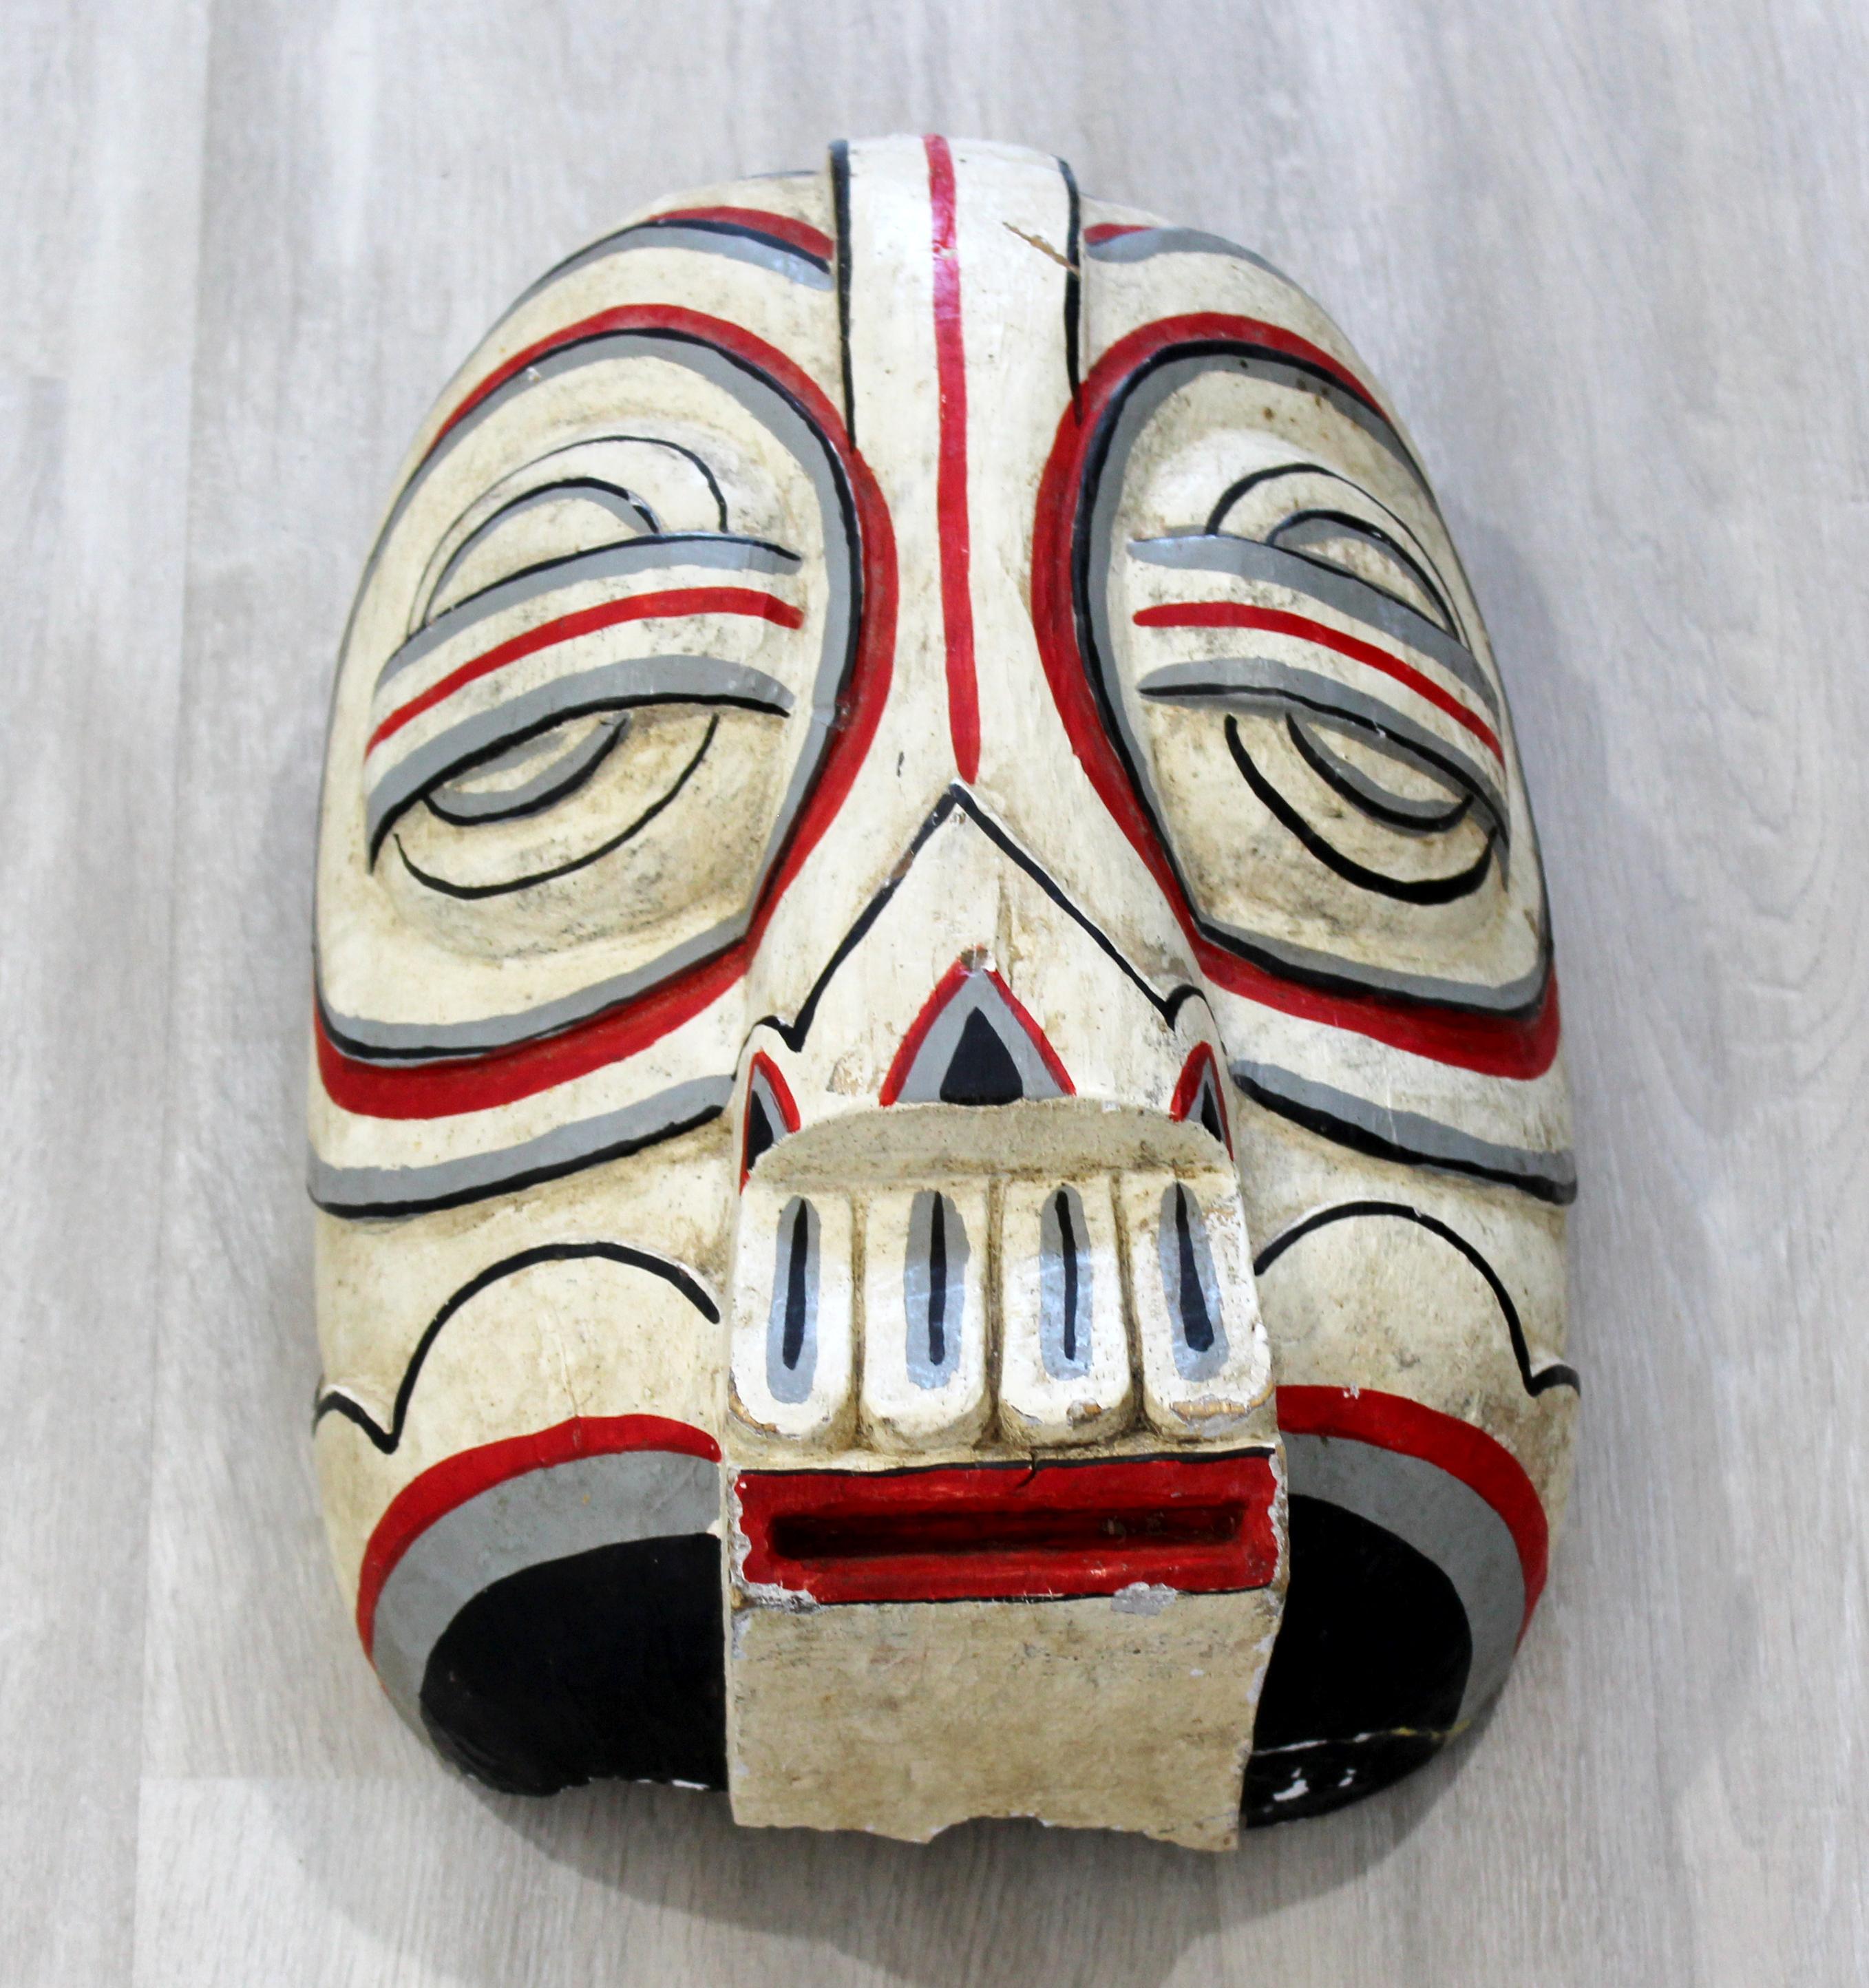 For your consideration is a wonderful, carved and painted wood wall art sculpture, of a totem style, tribal mask. In fair condition, removed from foundation. The dimensions are 9.5